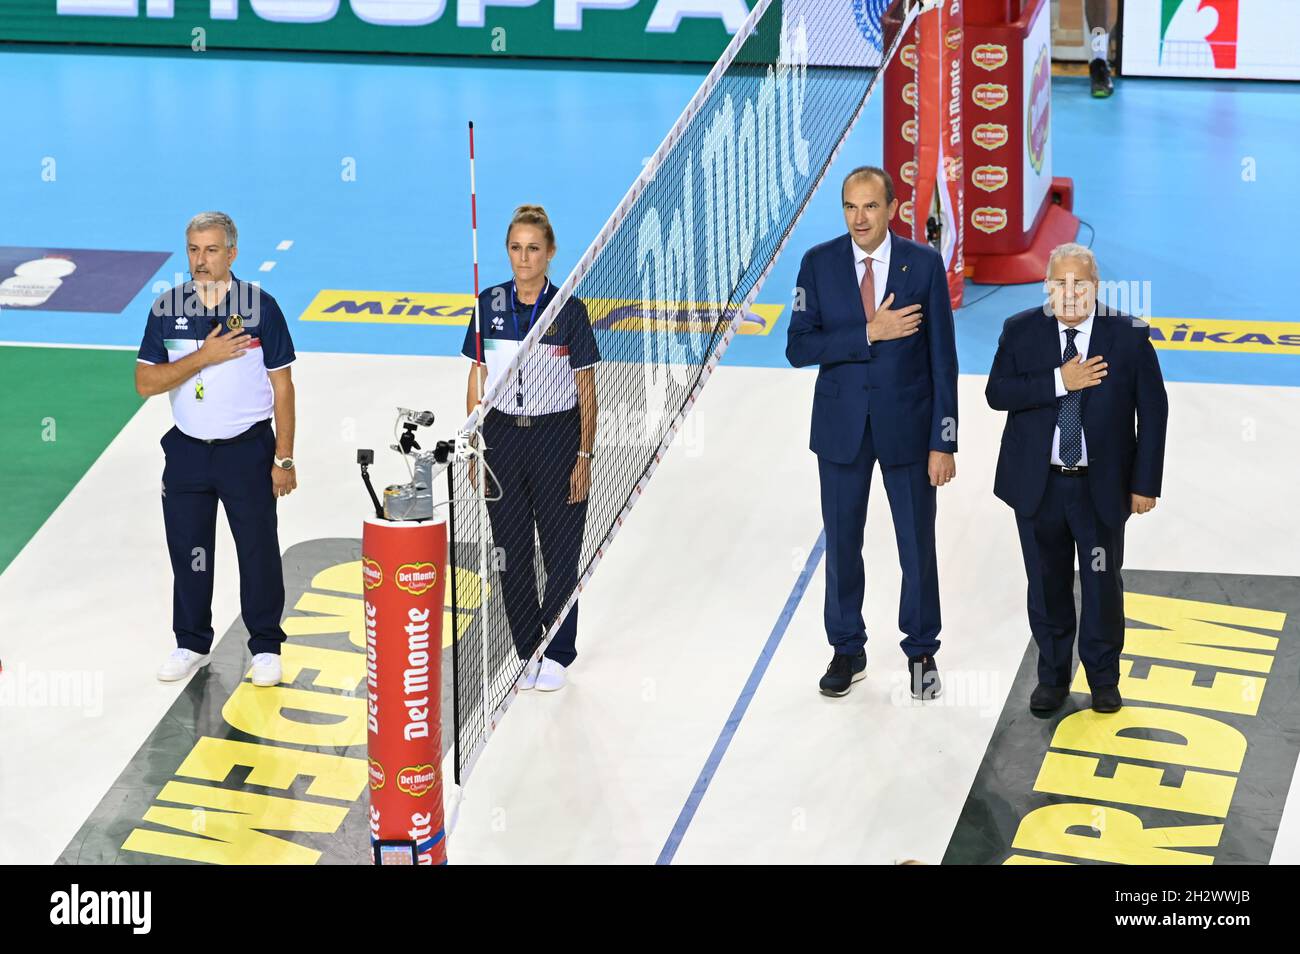 Eurosuole Forum, Civitanova Marche, Italy, October 24, 2021, Roberto Boris  of Vigevano and Rossella Piana of Carpi referees of the match and Massimo  Righi (President of the Serie A Volleyball League) and